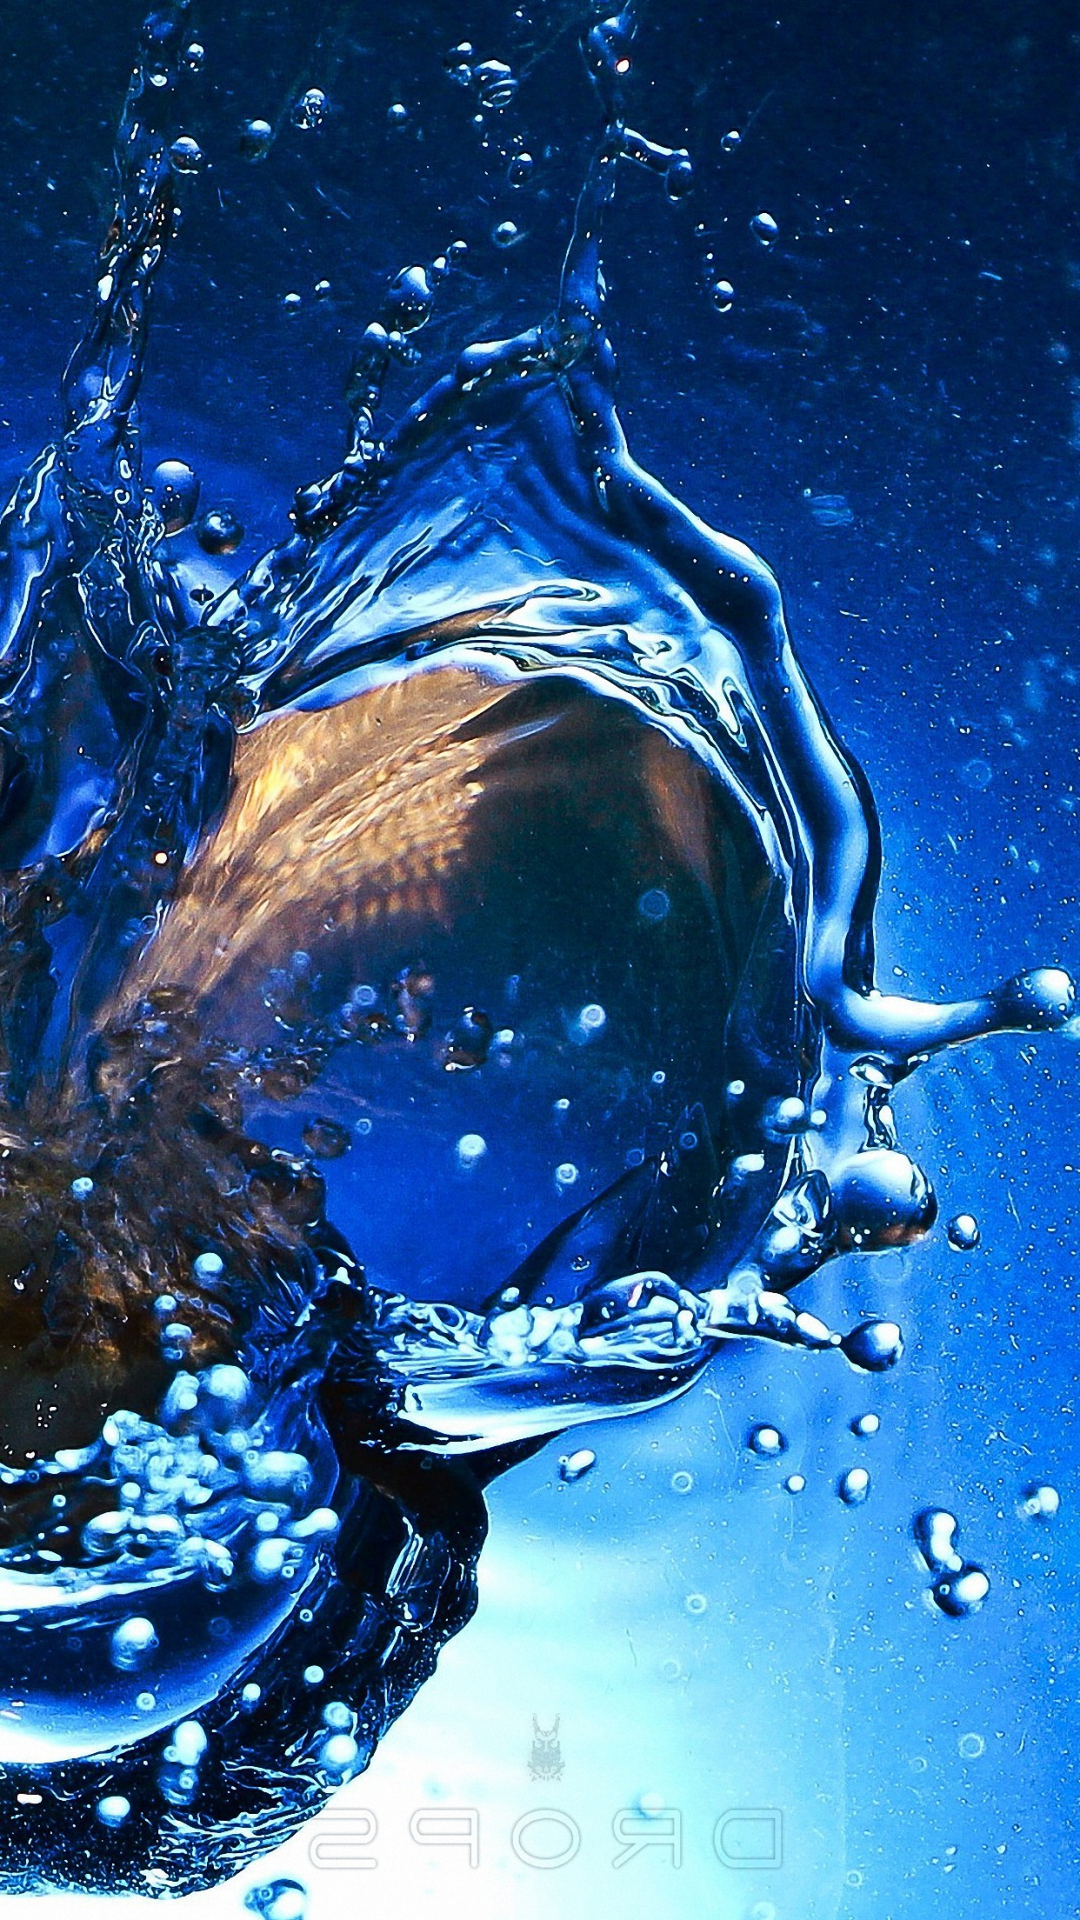 Hd Clean Water Splash Iphone 6 Plus Wallpapers - Still Life Photography -  1080x1920 Wallpaper 